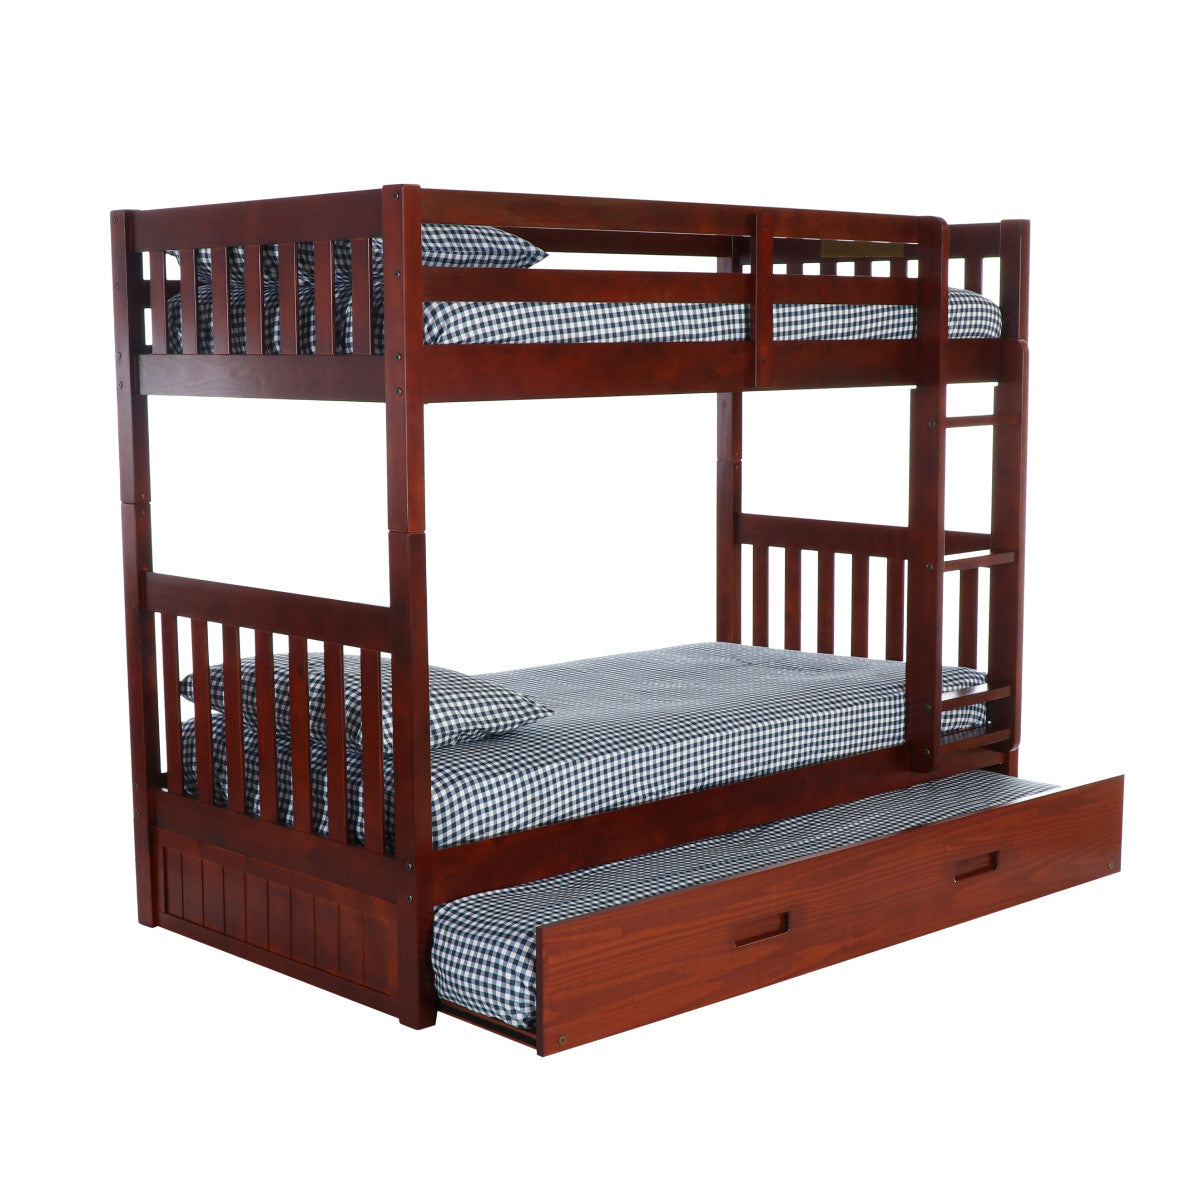 TWIN/TWIN MISSION BUNK BED WITH TWIN TRUNDLE BED IN MERLOT FINISH